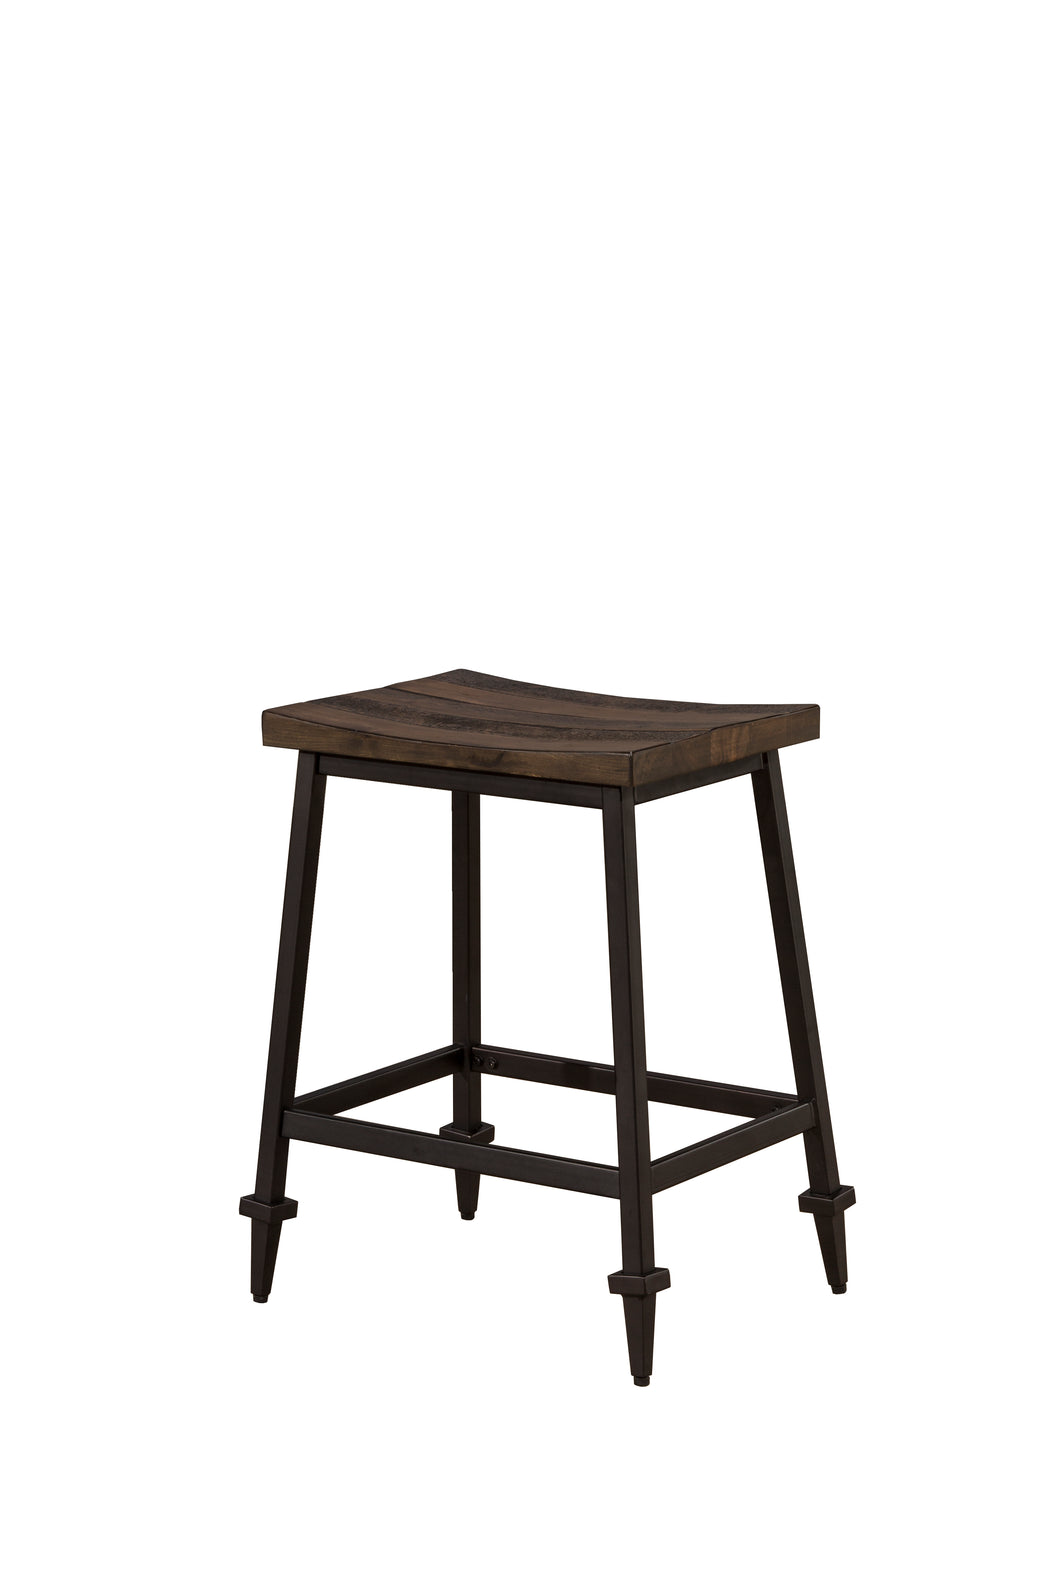 Trevino Backless Non-Swivel Counter Stool by Hillsdale Furniture 4236-822